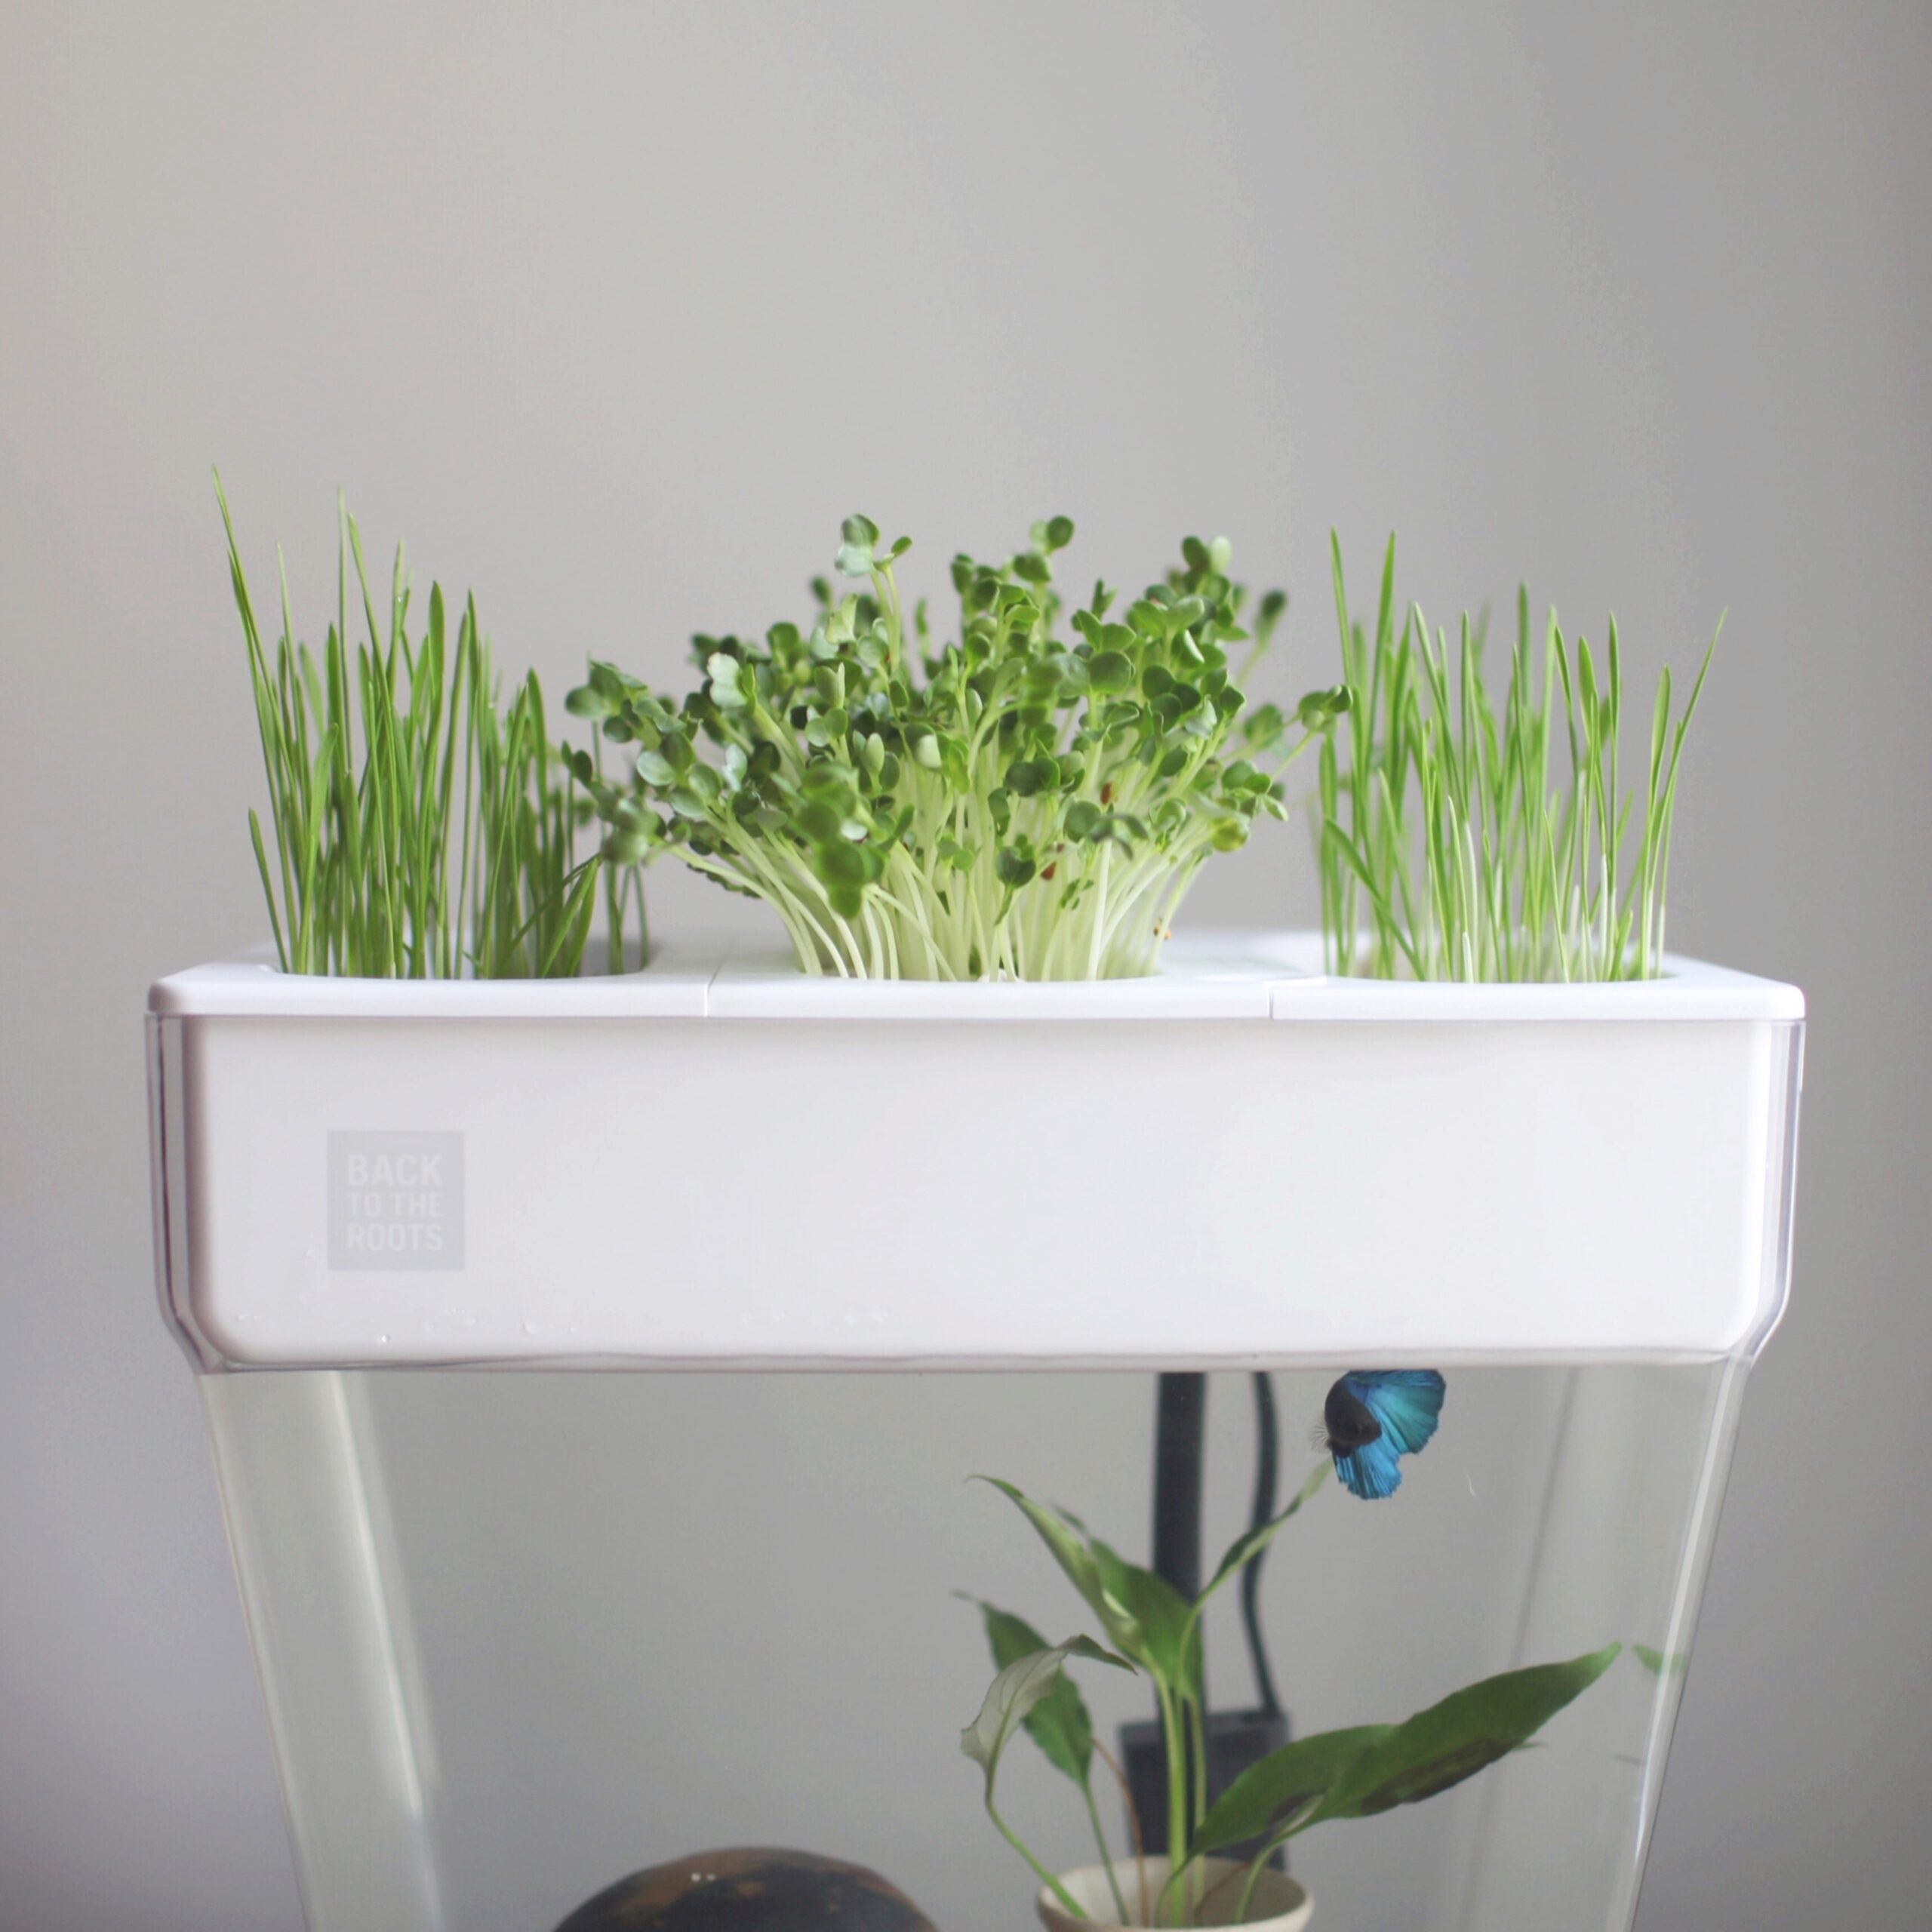 The Future Of Food: Innovations In Hydroponics And Aquaponics For Preppers